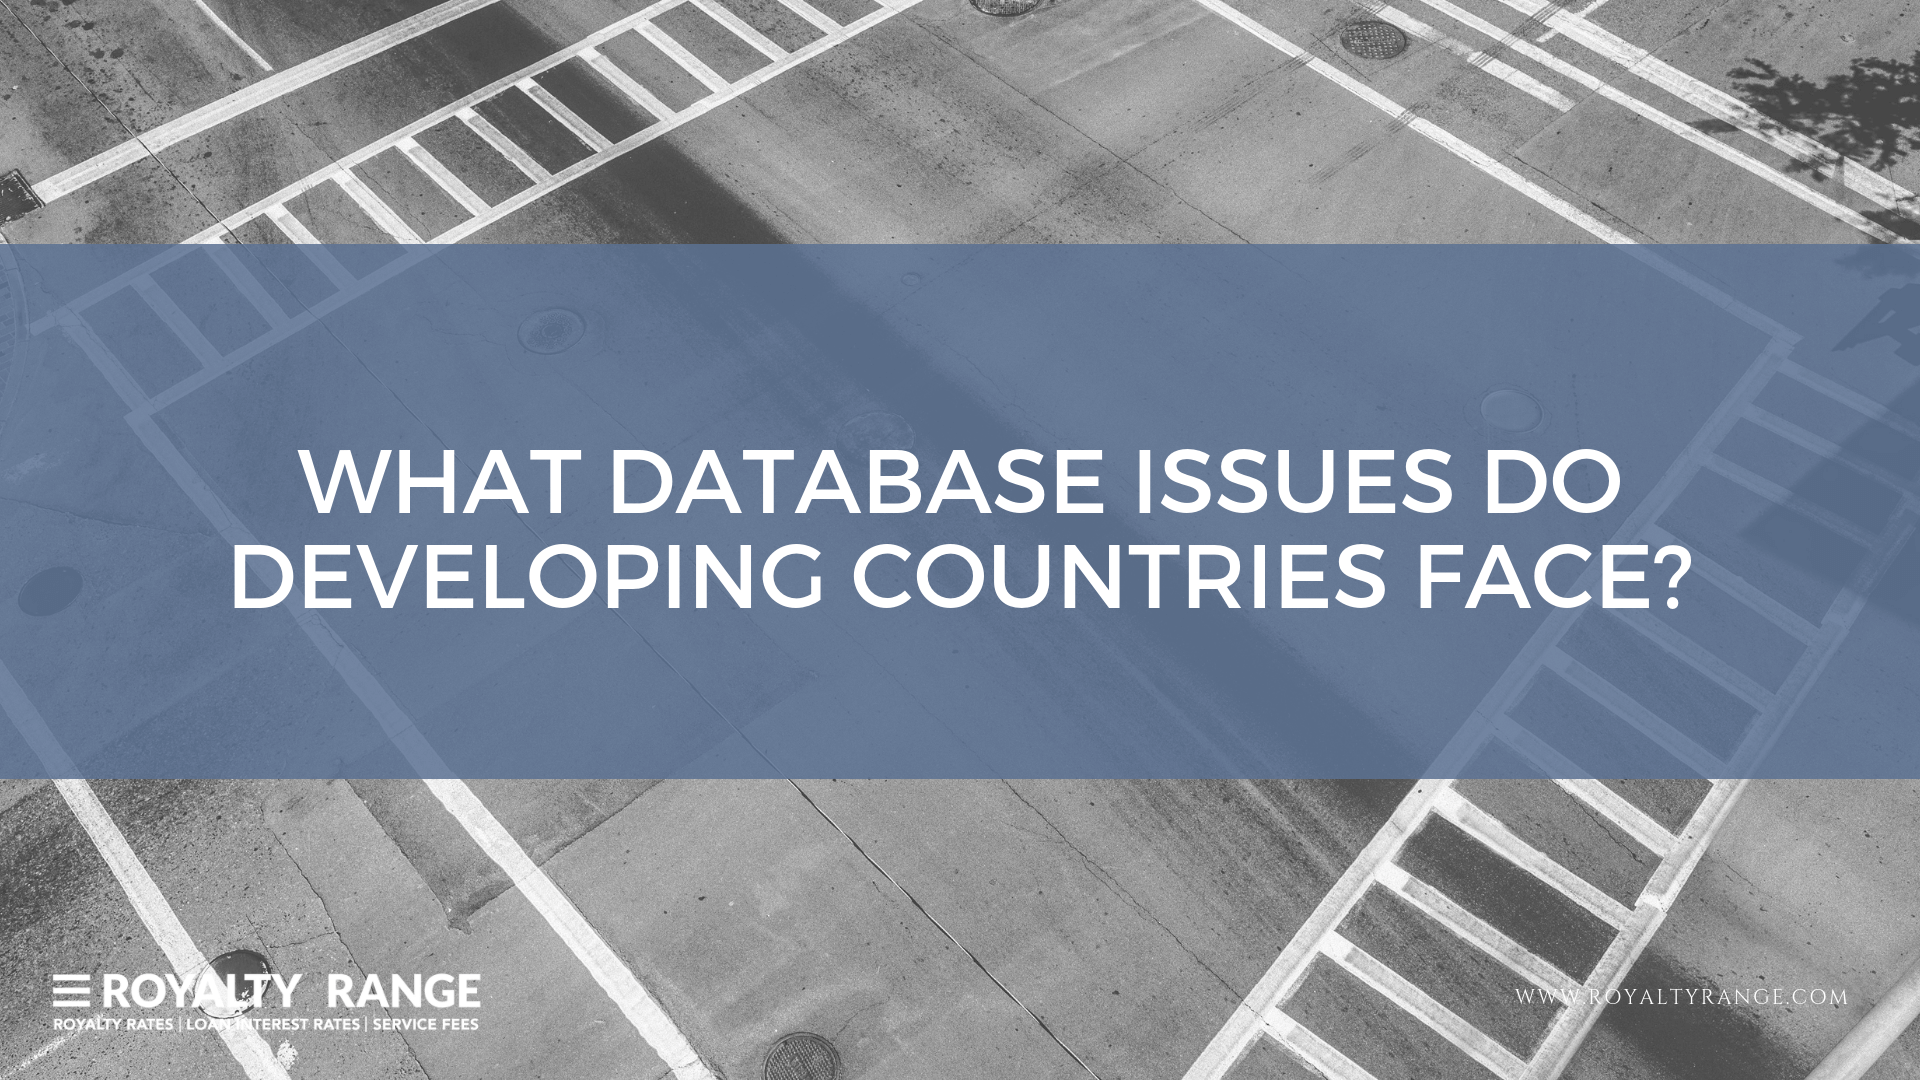 What database issues do developing countries face?